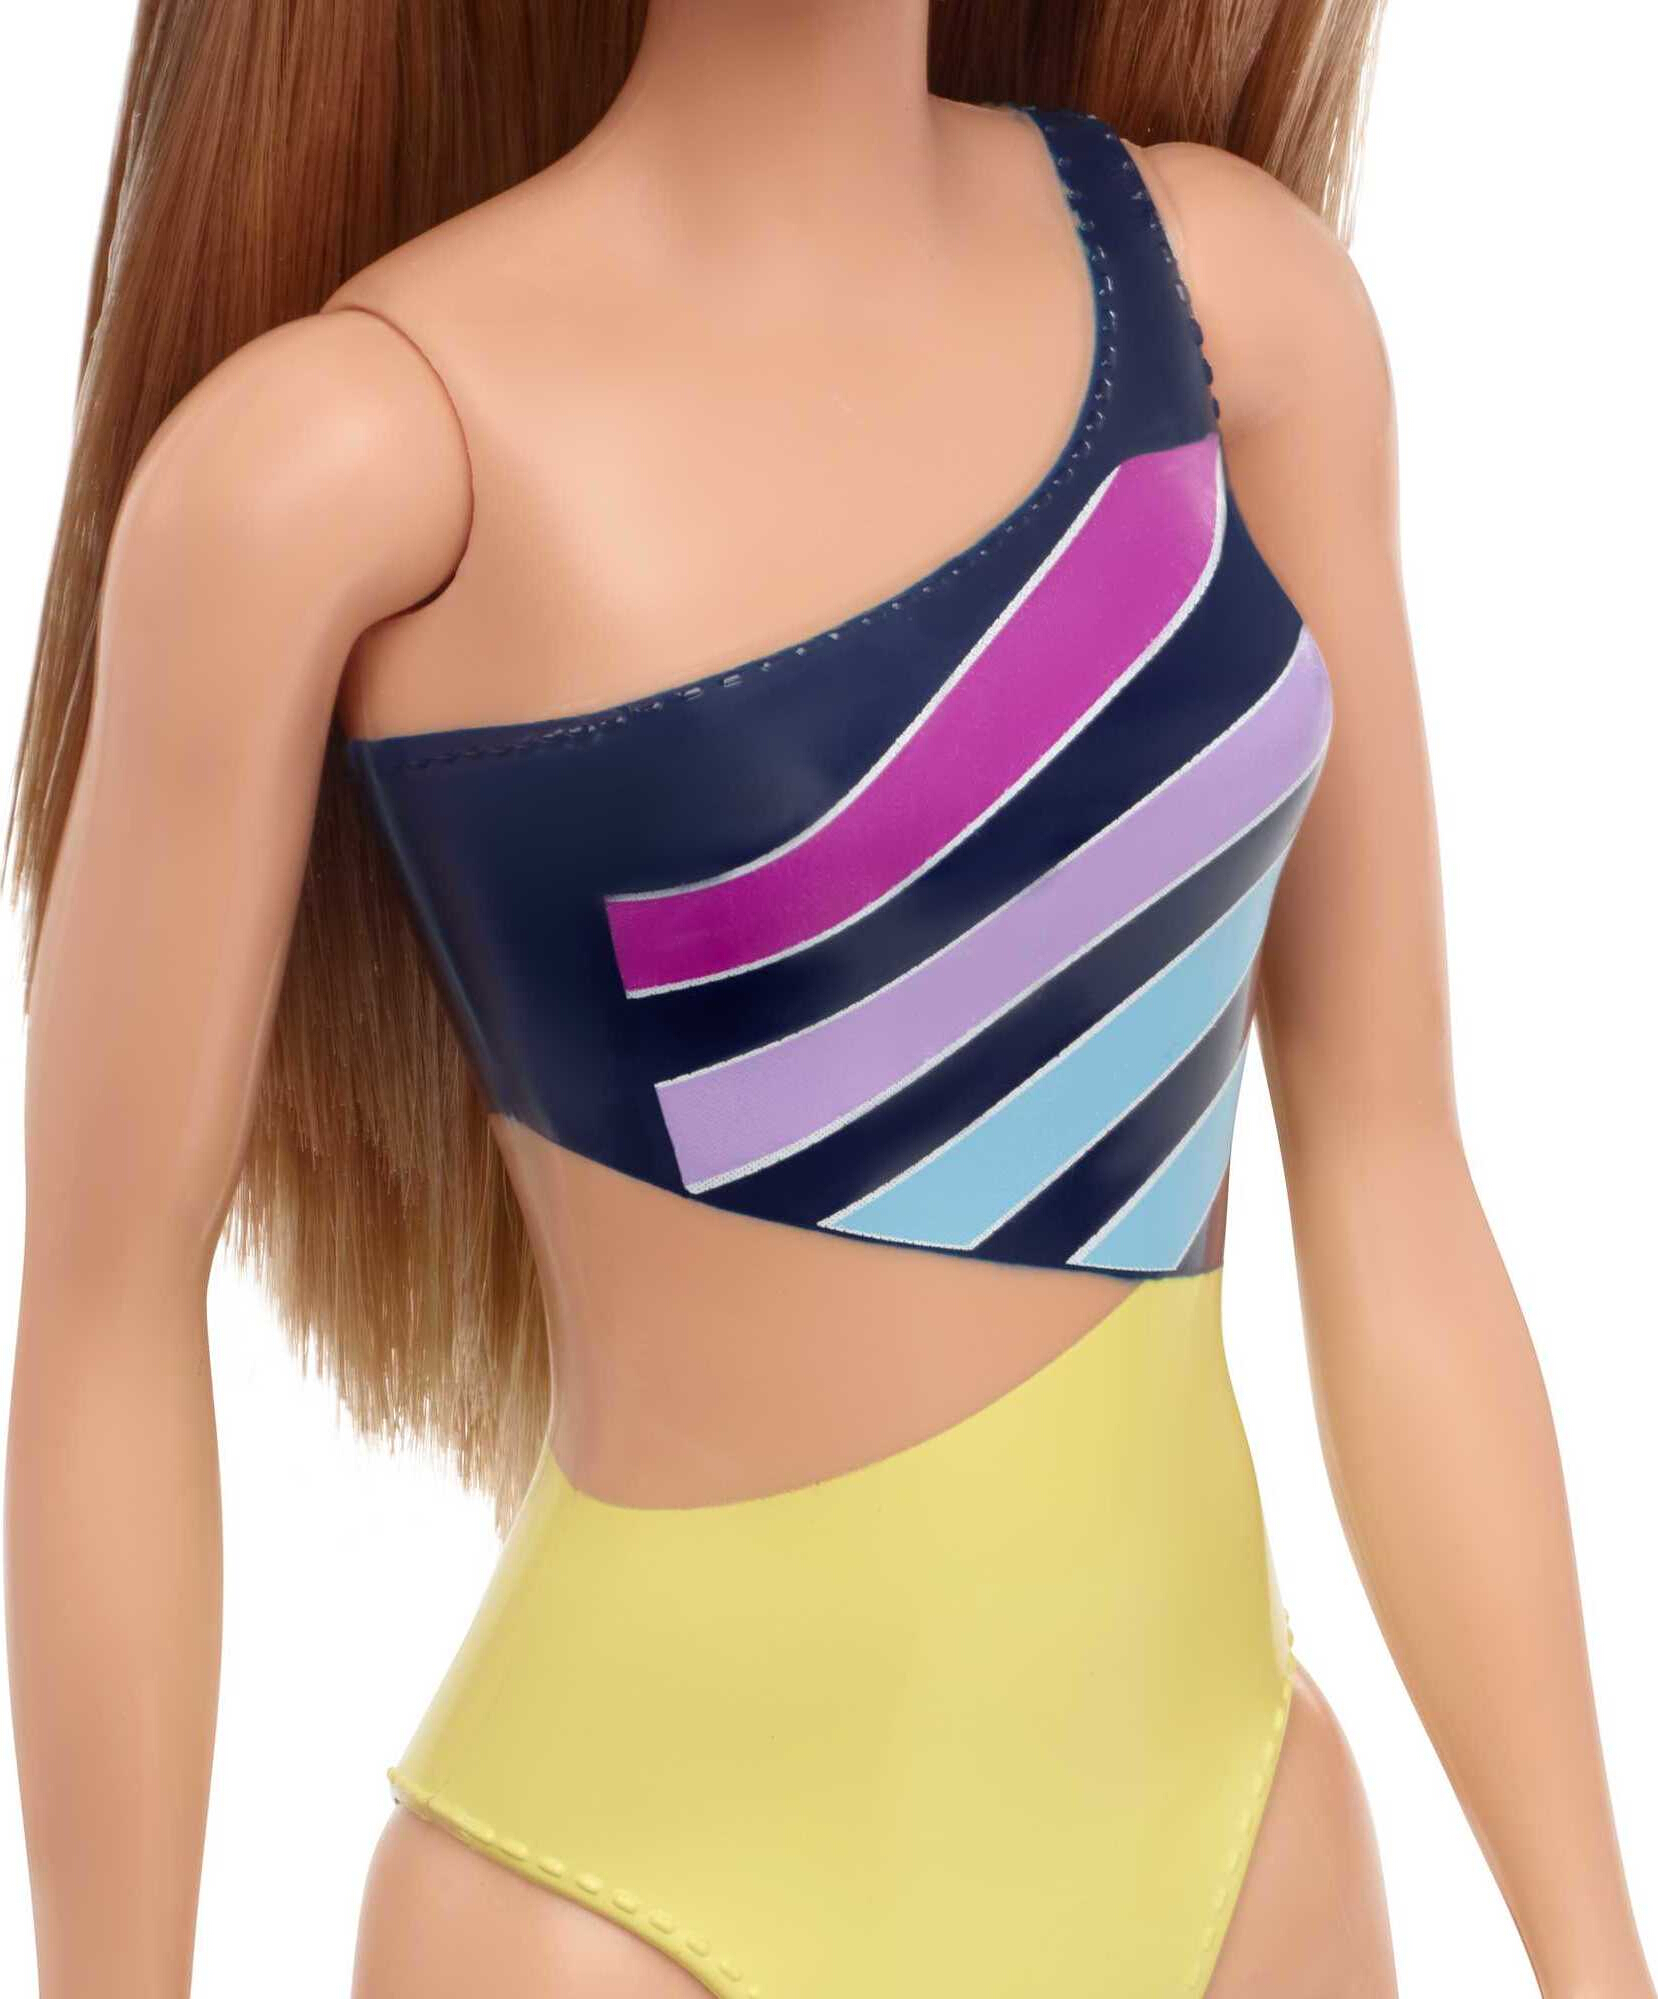 Barbie Swimsuit Beach Doll with Blonde Hair & Striped Suit - image 5 of 6